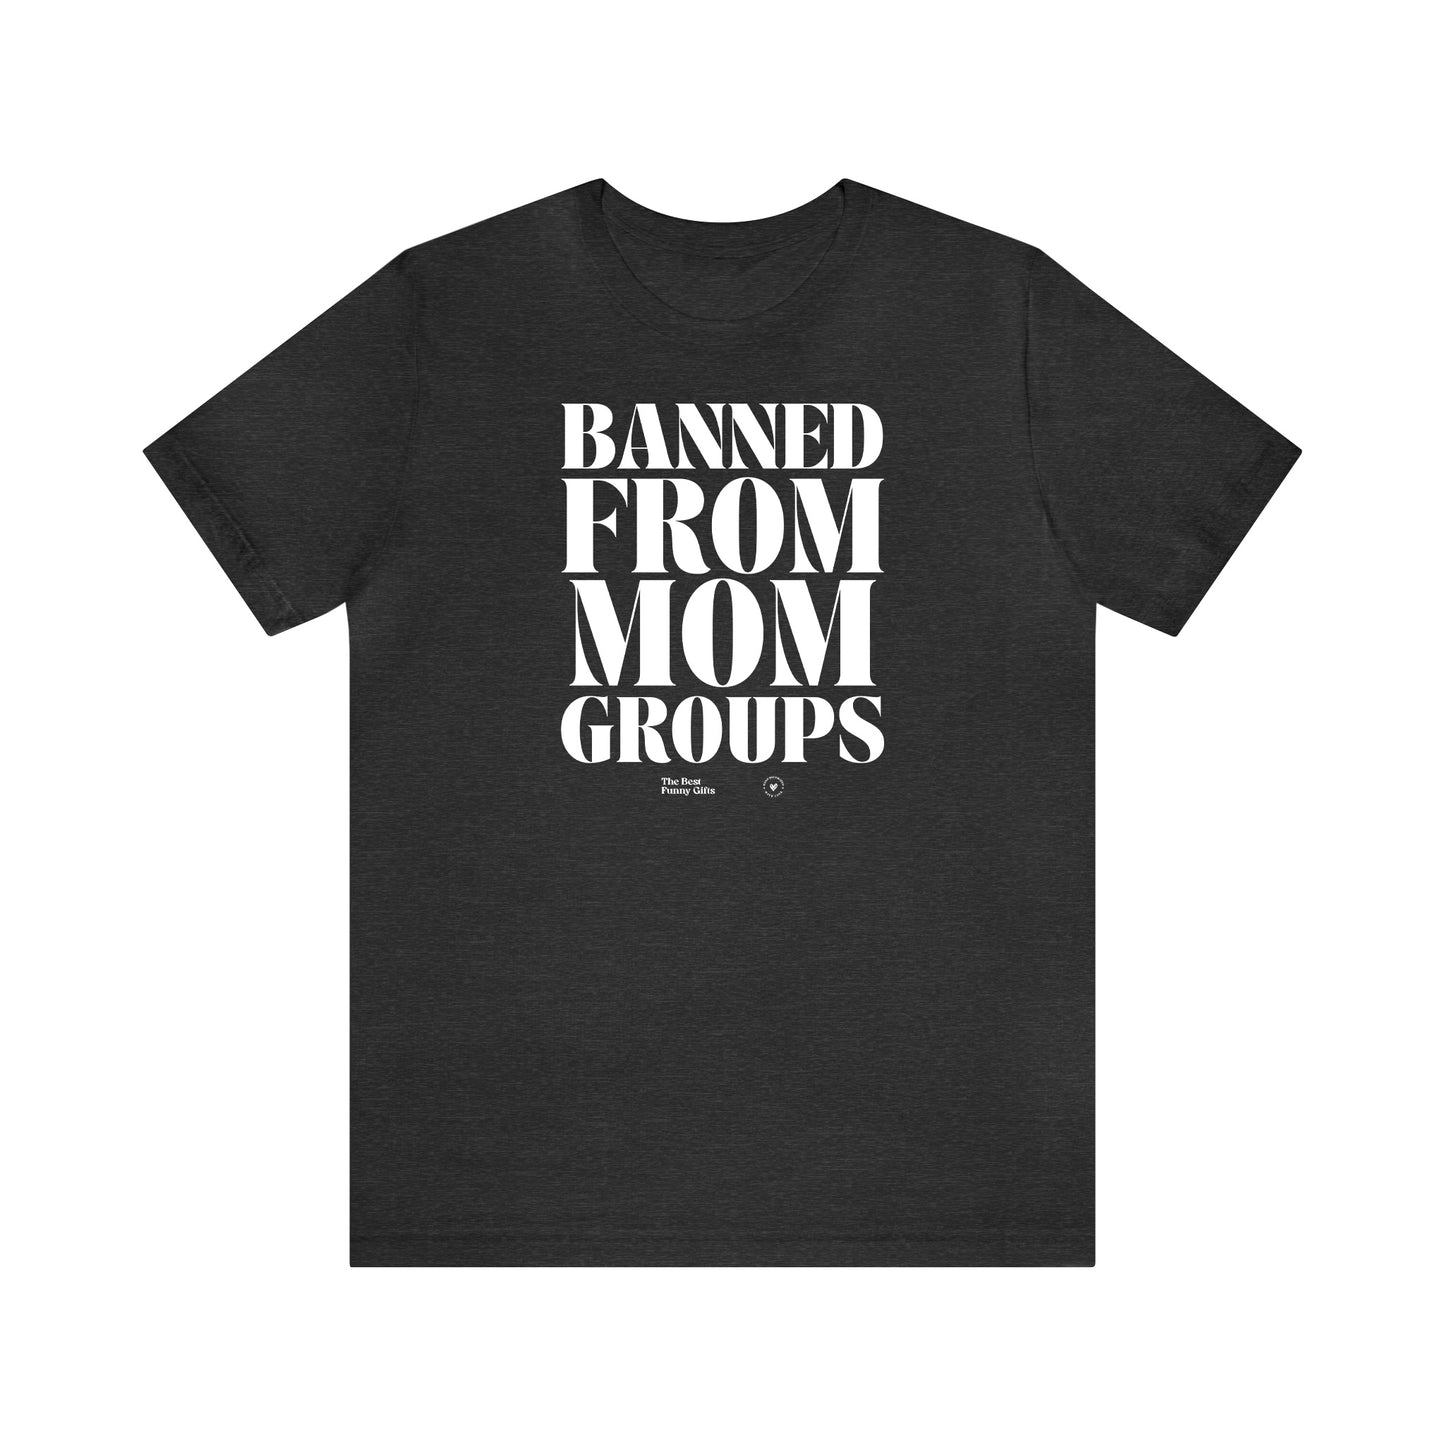 Funny Shirts for Women - Banned From Mom Groups - Women’s T Shirts